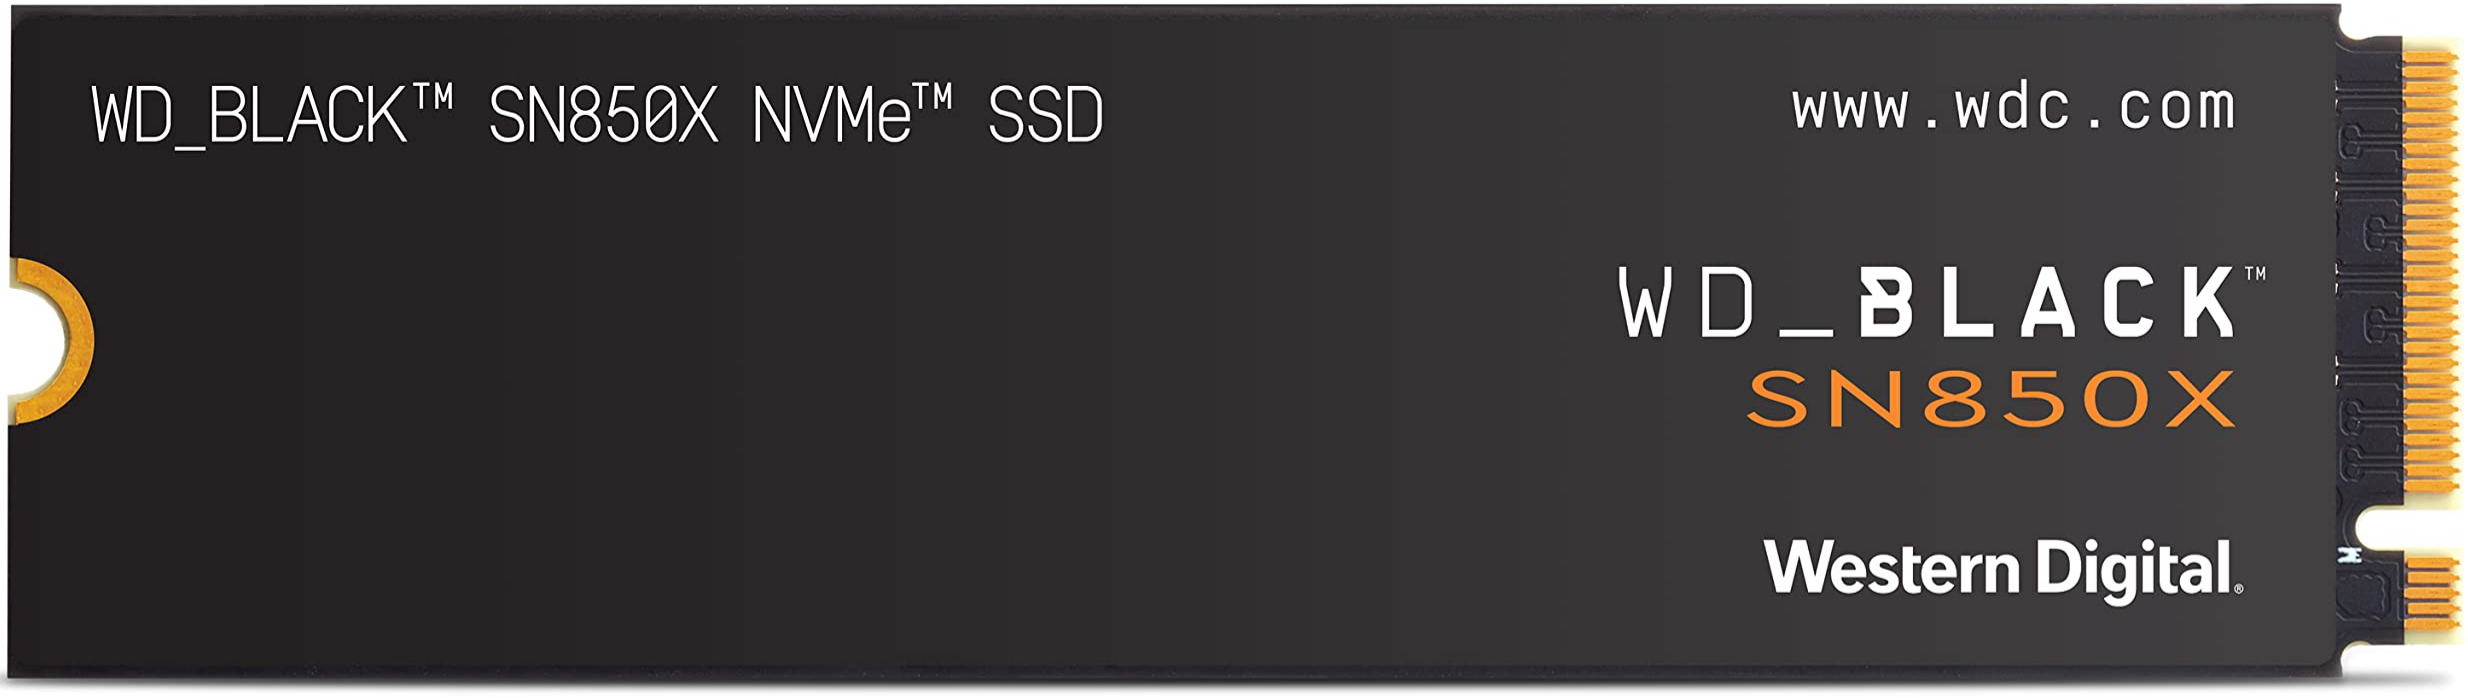 WD BLACK 2TB SN850X NVMe Internal Gaming SSD Solid State Drive - Gen4 PCIe, M.2 2280, Up to 7,300 MB/s - $135 at Amazon